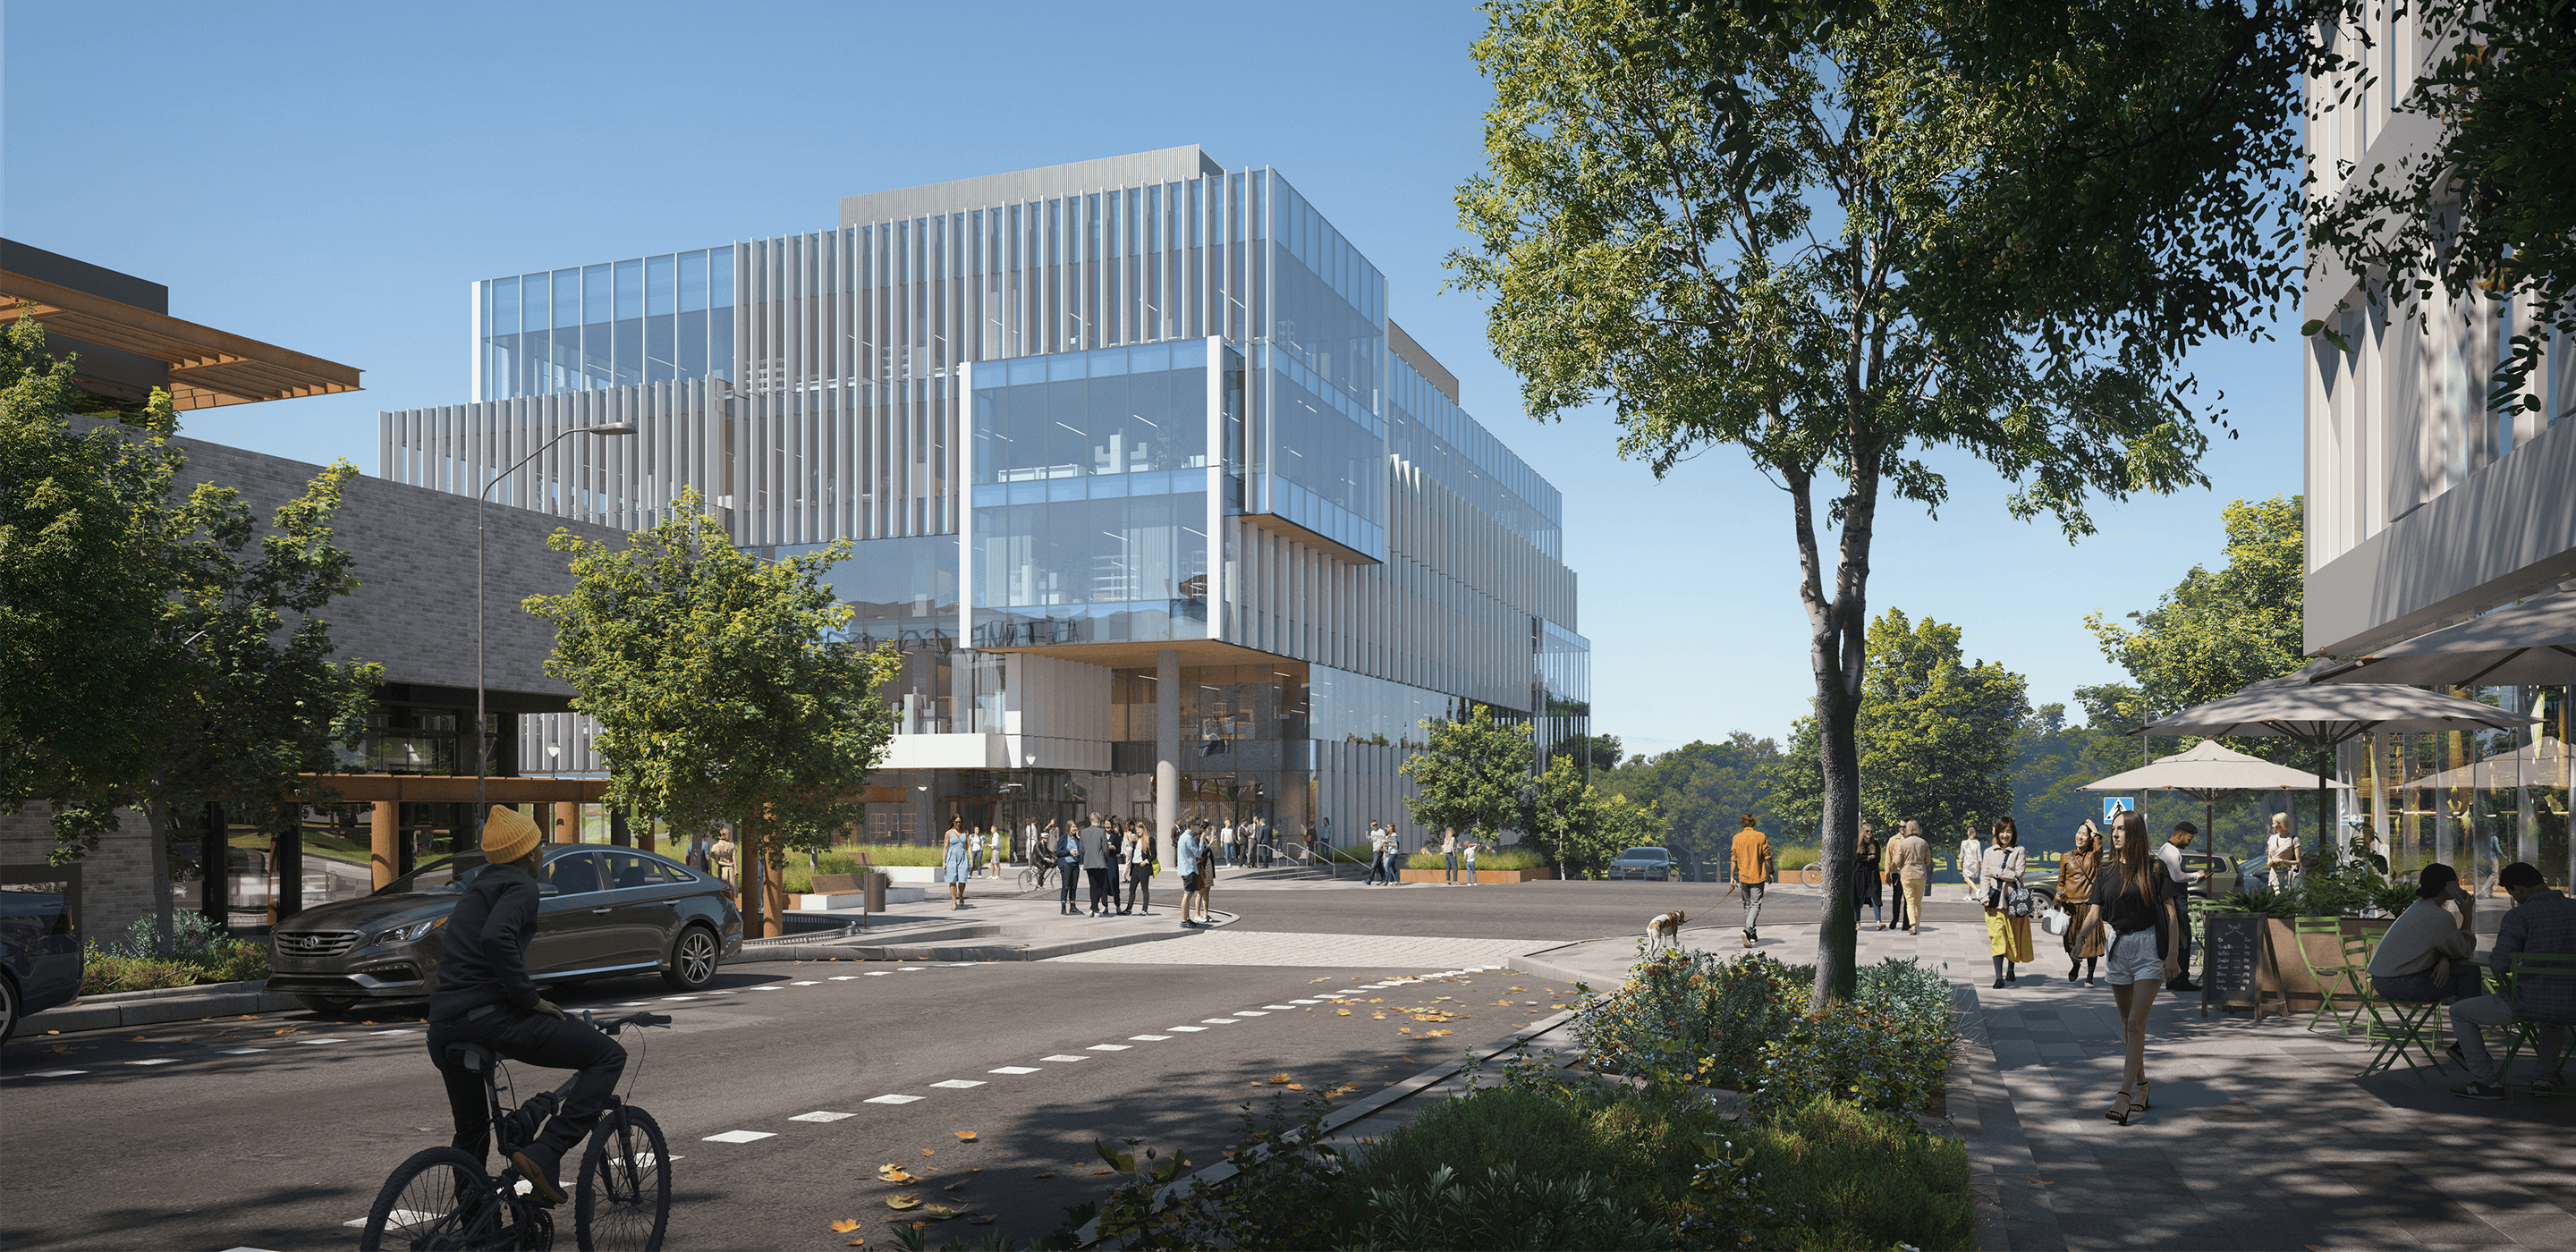 Rendering of multi-story research lab on busy urban street corner